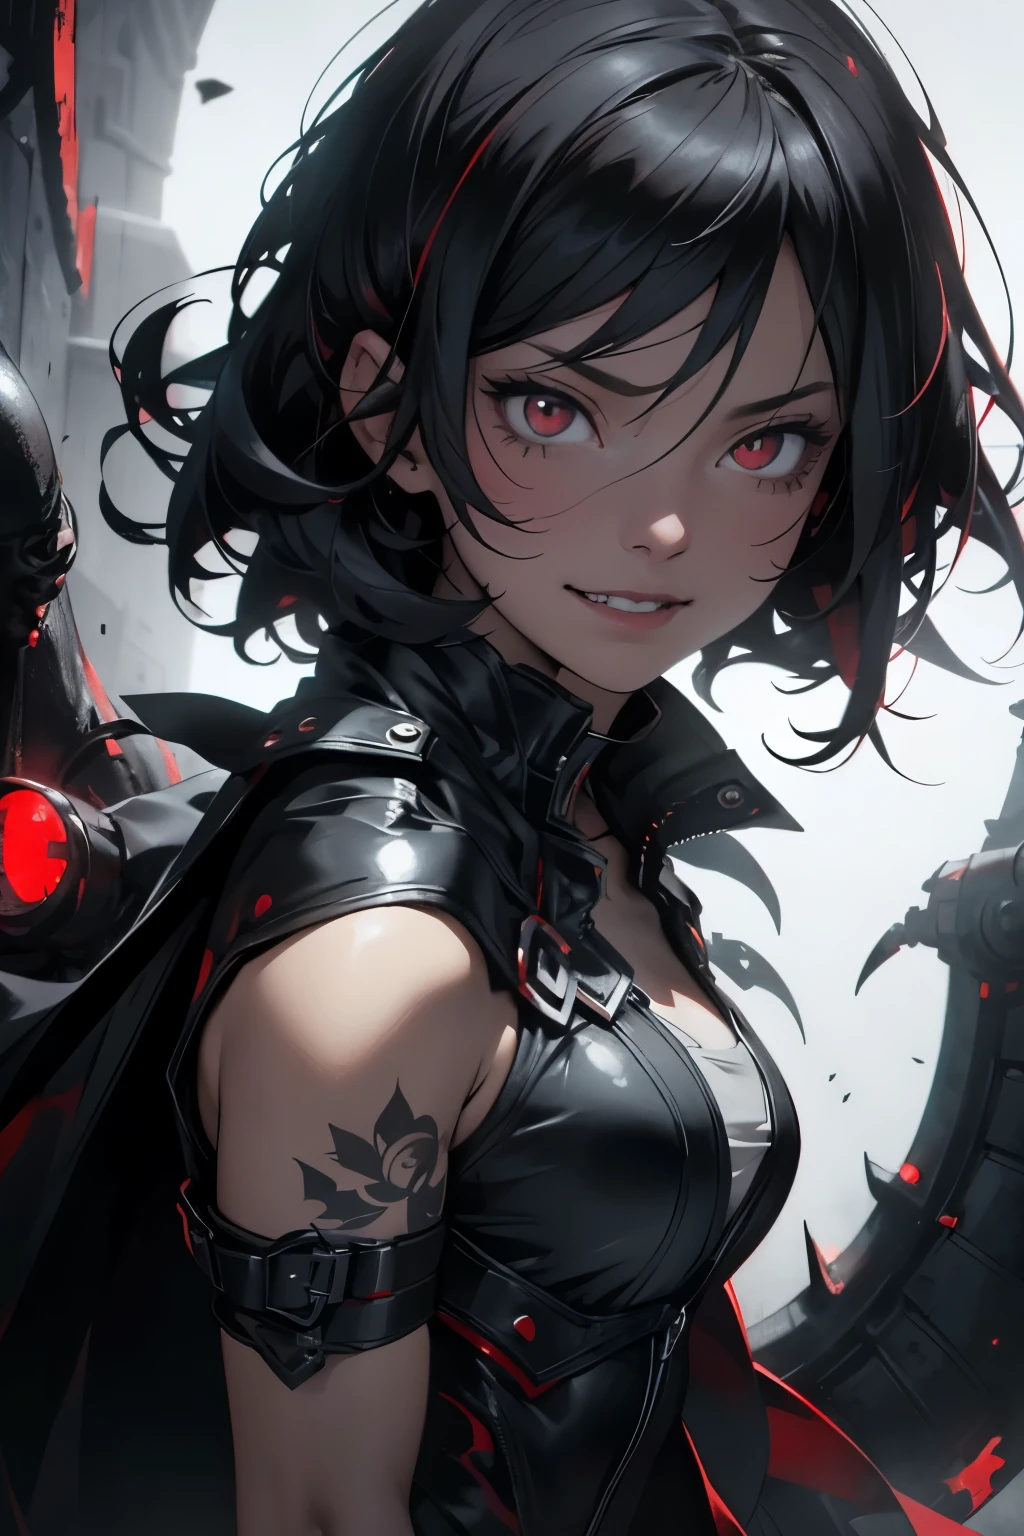 Award-winning portrait of a girl with a fusion of grimreaper and smiling expression, her short curly black hair framing her perfectly red eyes that gleam with an otherworldly glow. The background is set in a noir mood with shadows casting long, dramatic lines, adding to the mysterious allure of the girl. Her fangs, sharp and menacing, are visible, dripping with blood, giving an air of danger and intrigue. The photo is taken at a random angle, capturing every detail of her exquisite features in high resolution, making it a masterpiece of surreal, high-definition art. The artwork quality is best described as detailed and realistic, with a captivating play of light and